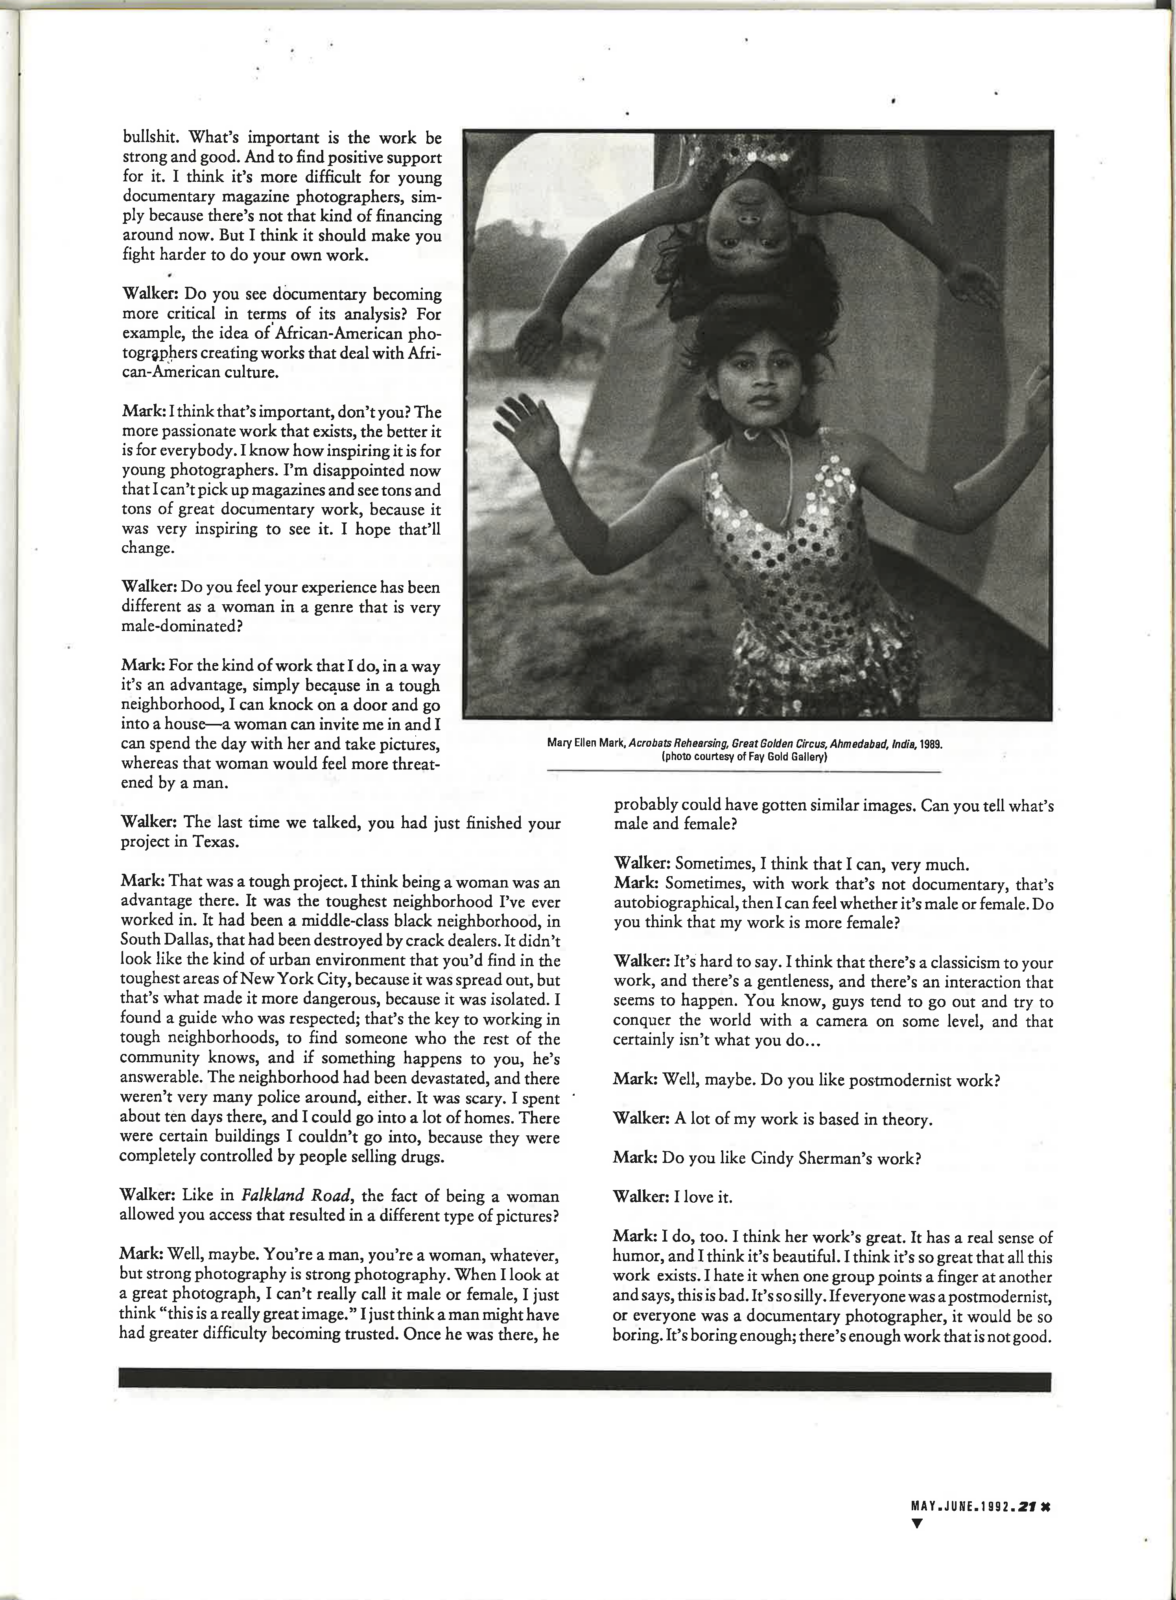 A black and white scan of the May/June 1992 edition of Art Papers featuring a black and white image at the top right of the page.